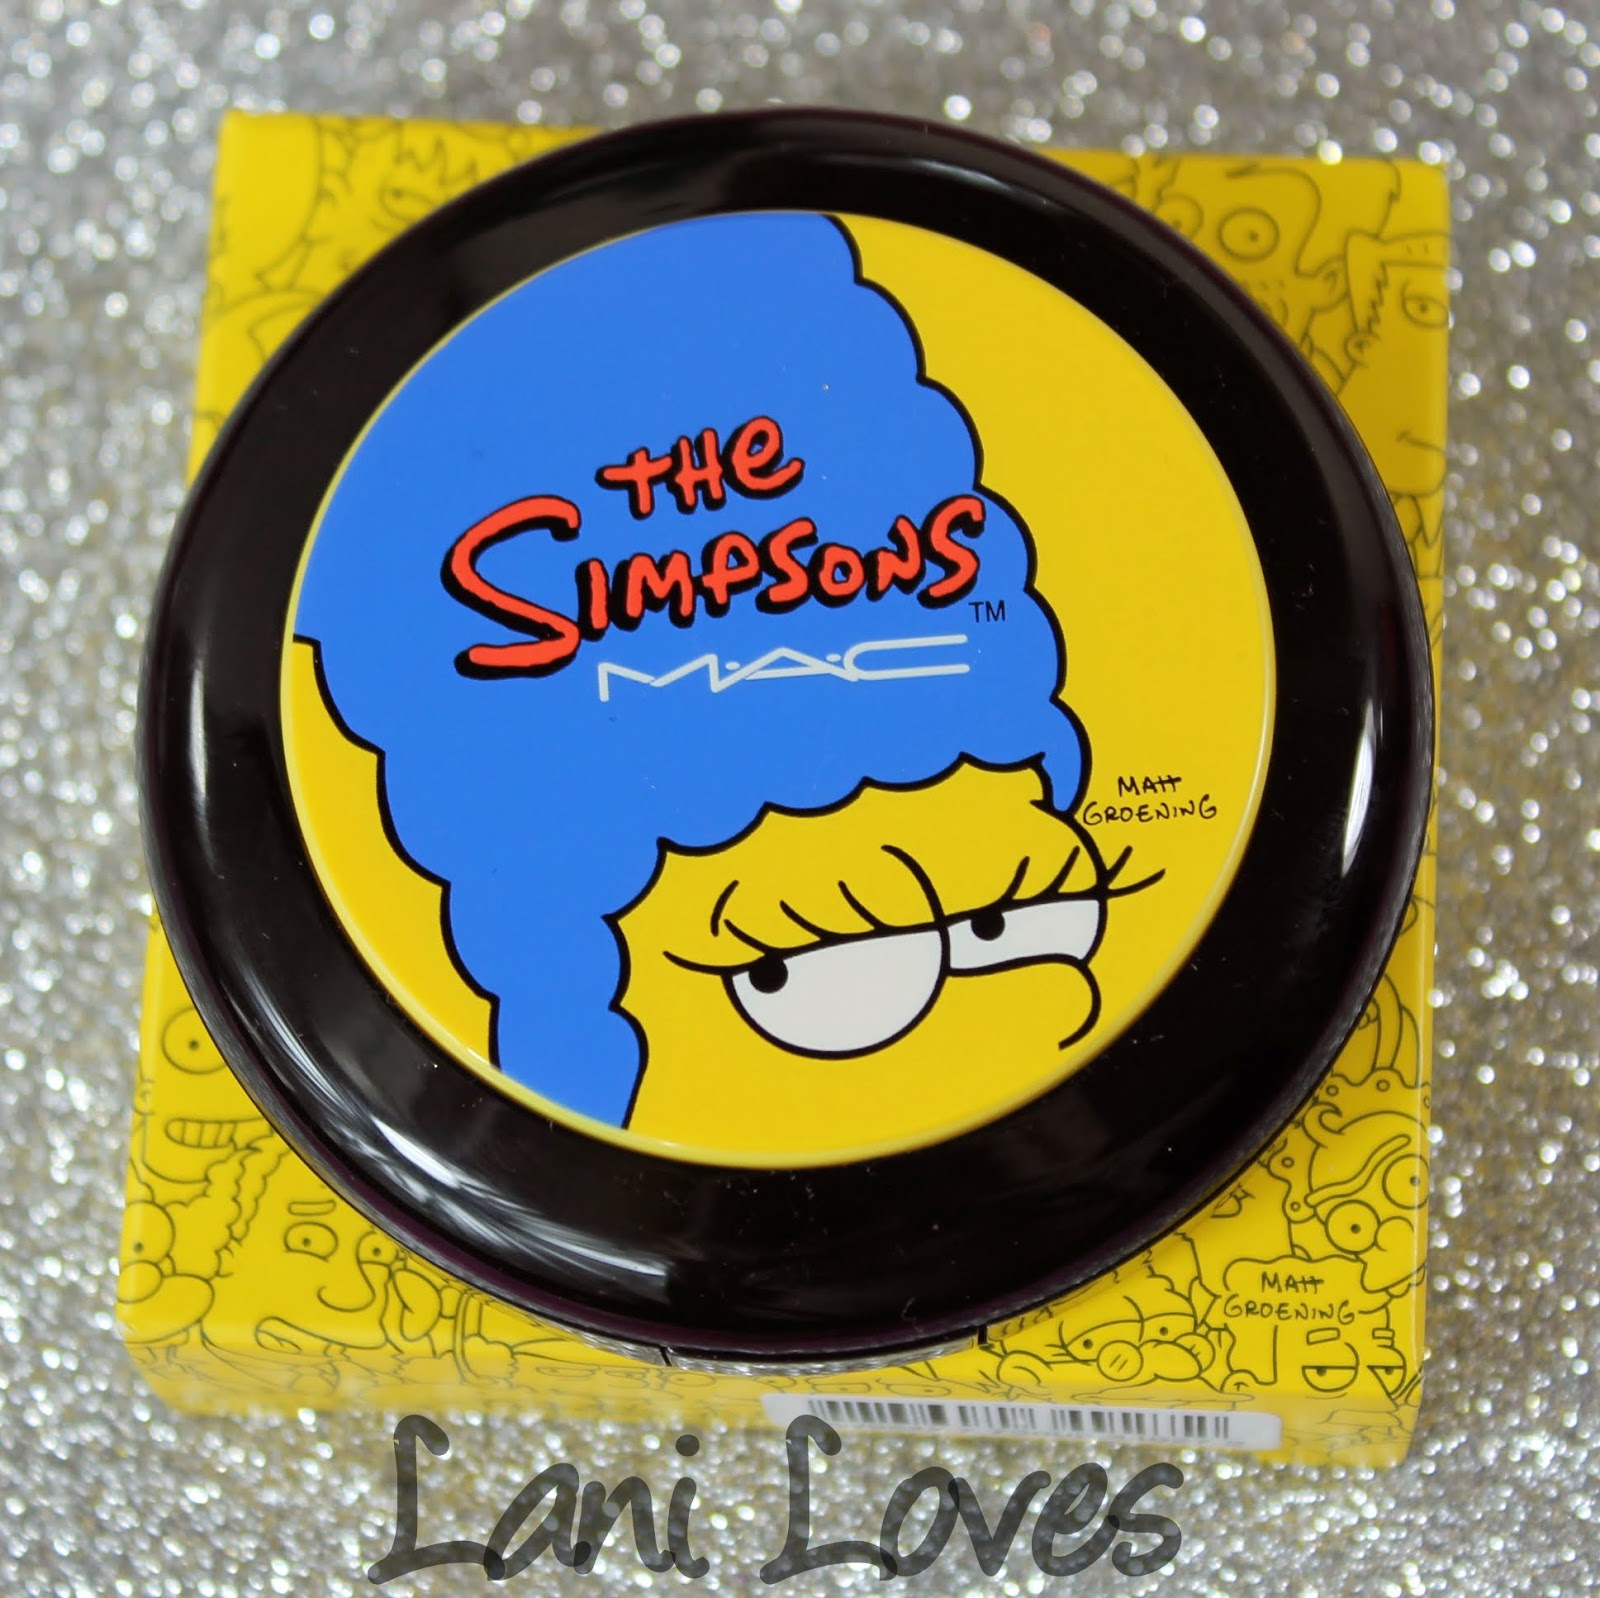 MAC Monday: MAC X The Simpsons - Sideshow You and Pink Sprinkles Blush Swatches & Review